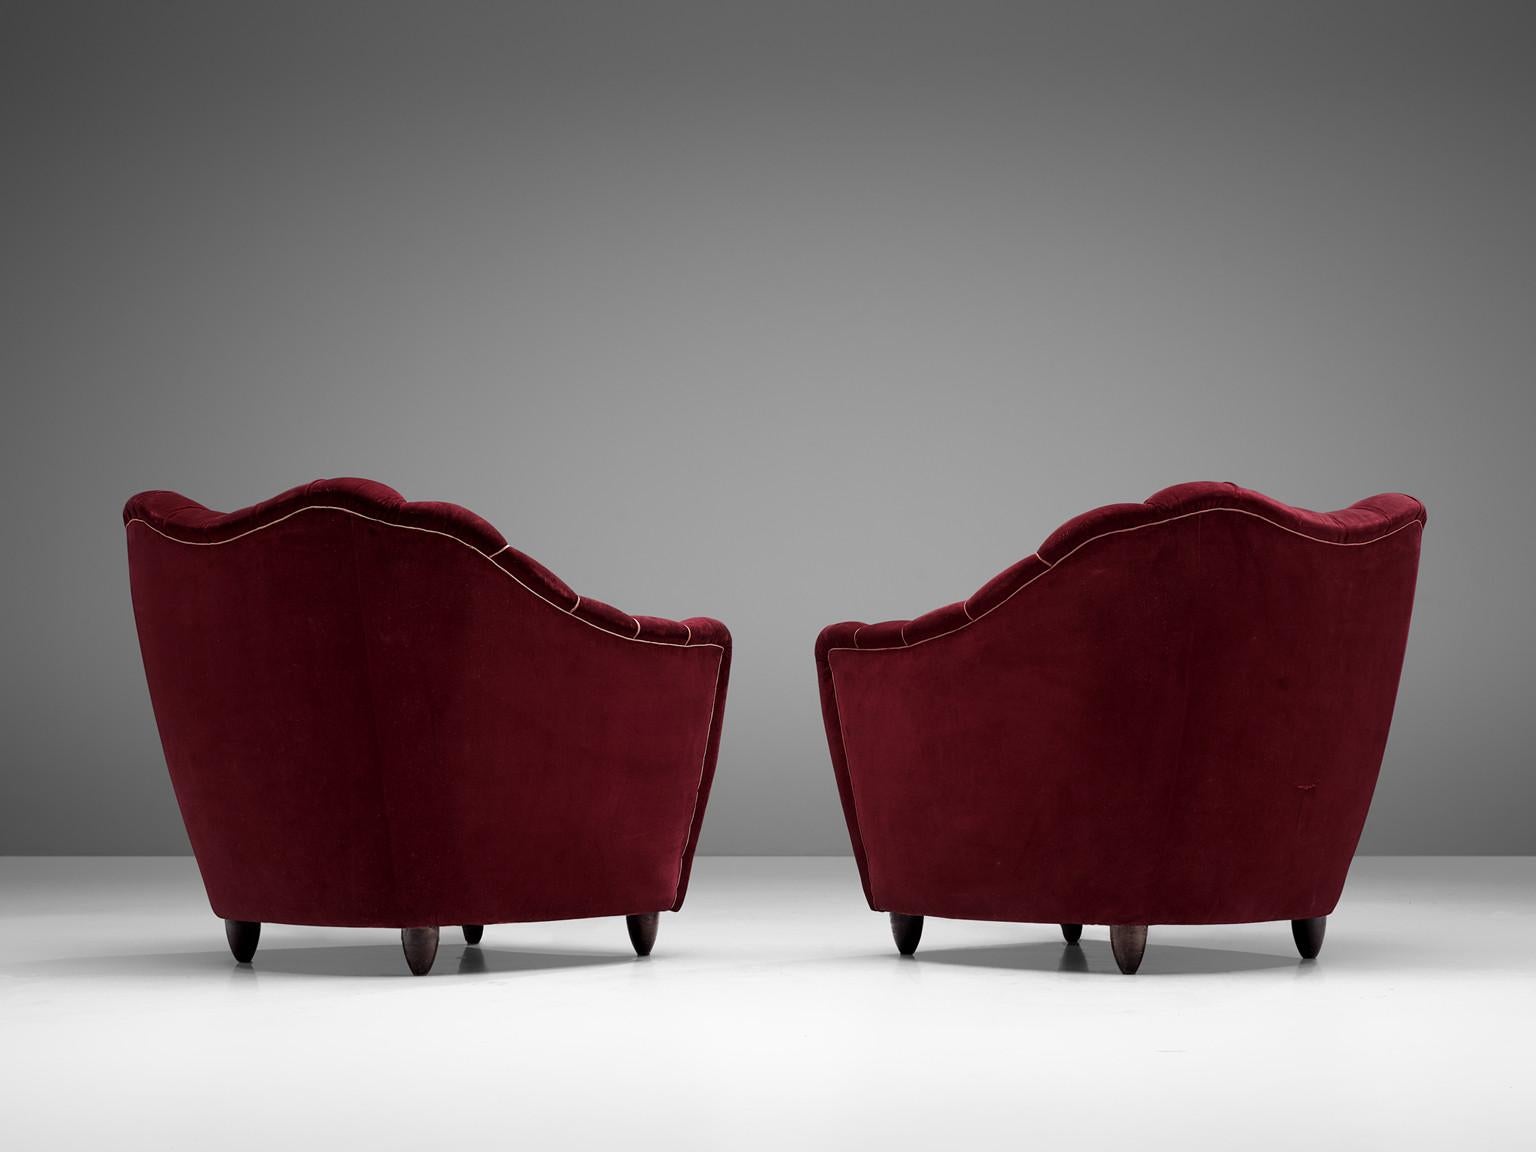 Pair of club chairs, velvet and wood, Italy, 1950s.

Theatrical set of lounge chairs being a wonderful example of Italian design from the 1950s. The chairs are bold and curvy, yet very elegant. The backrest is tufted and lined, which emphasizes the